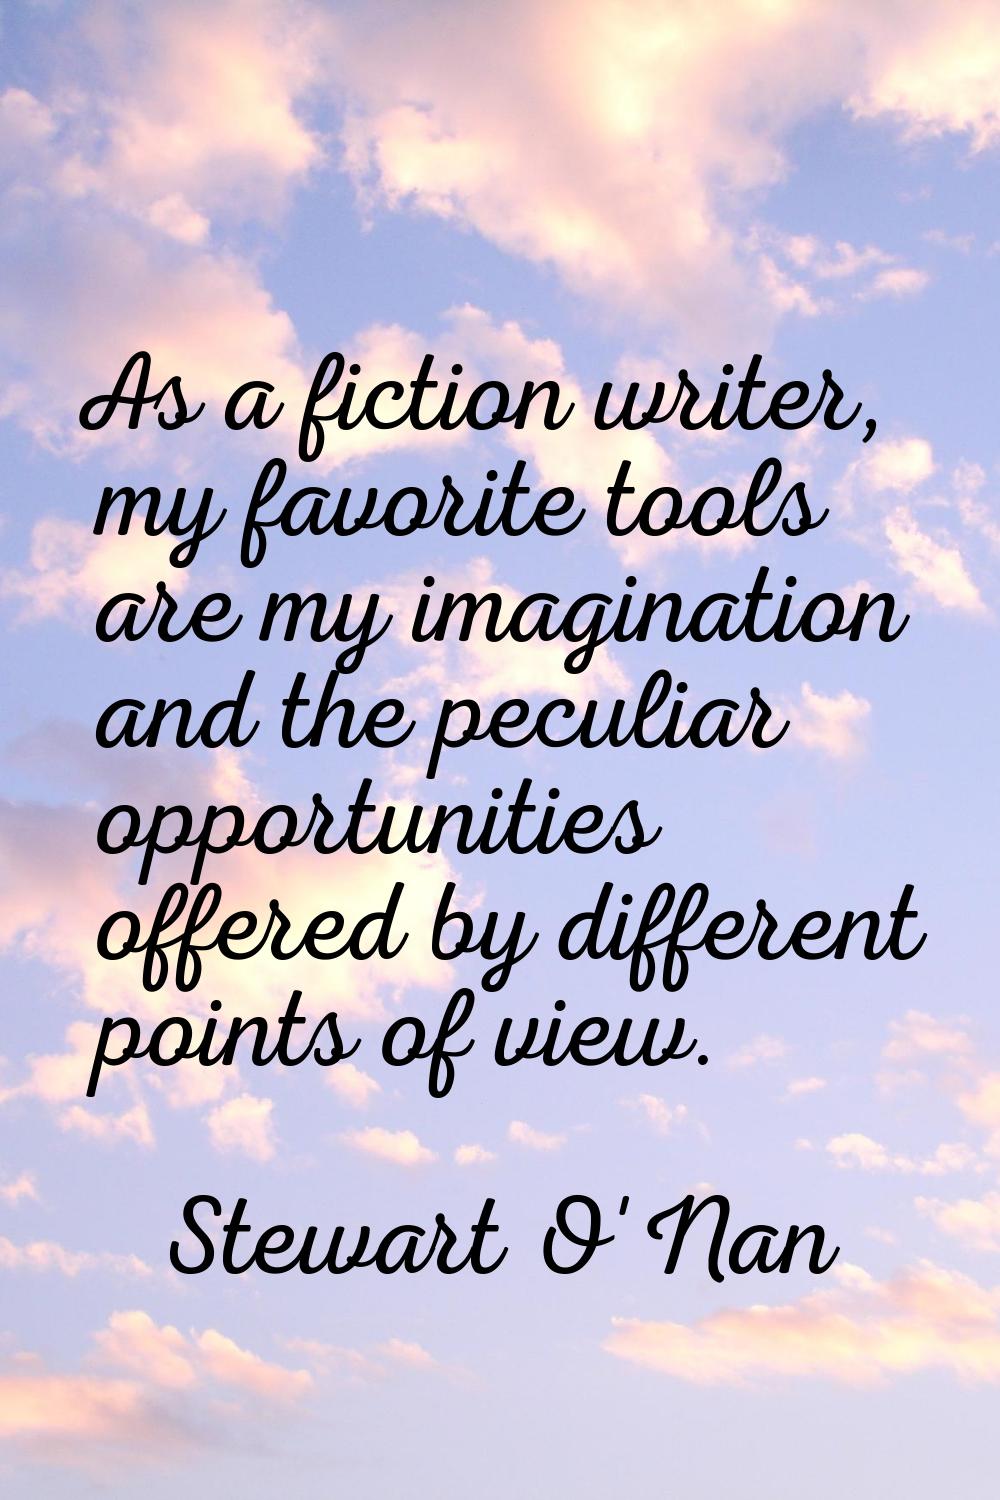 As a fiction writer, my favorite tools are my imagination and the peculiar opportunities offered by